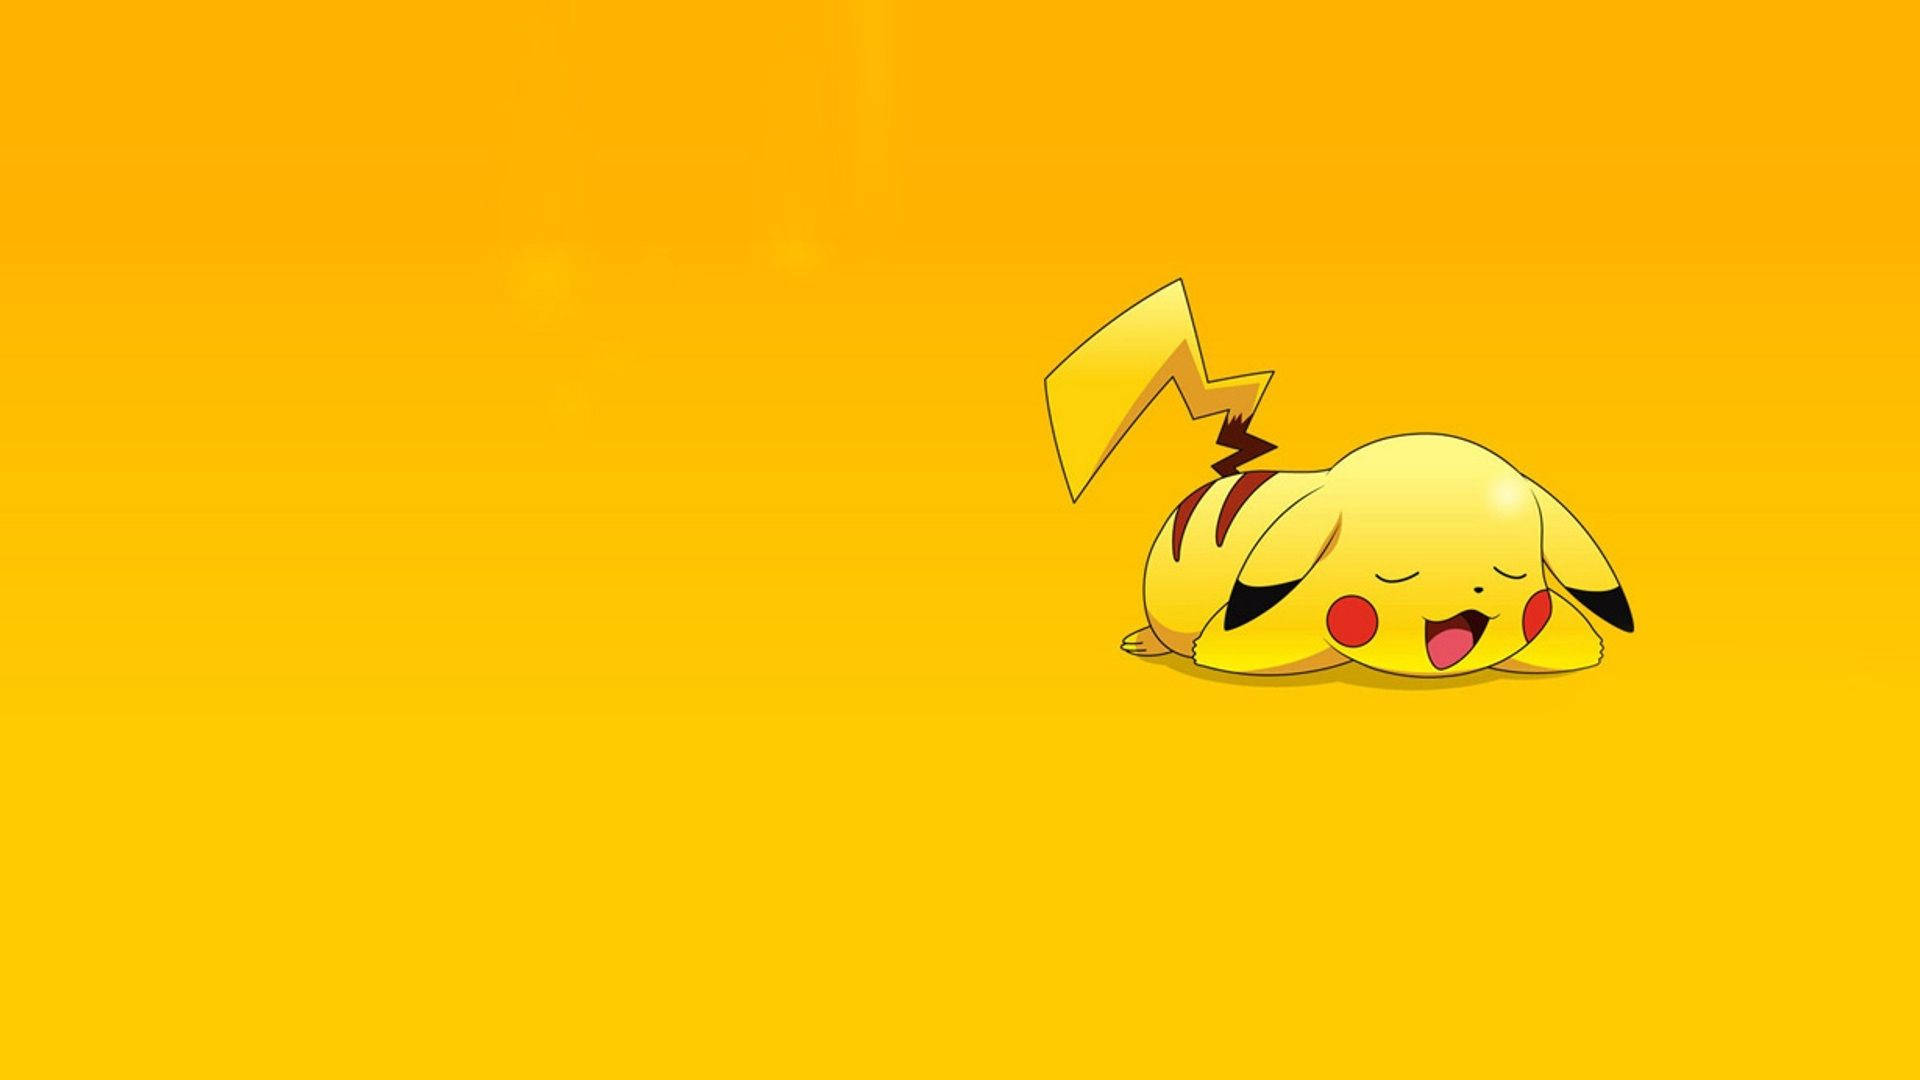 A Pikachu That's Ready For a Nap Wallpaper